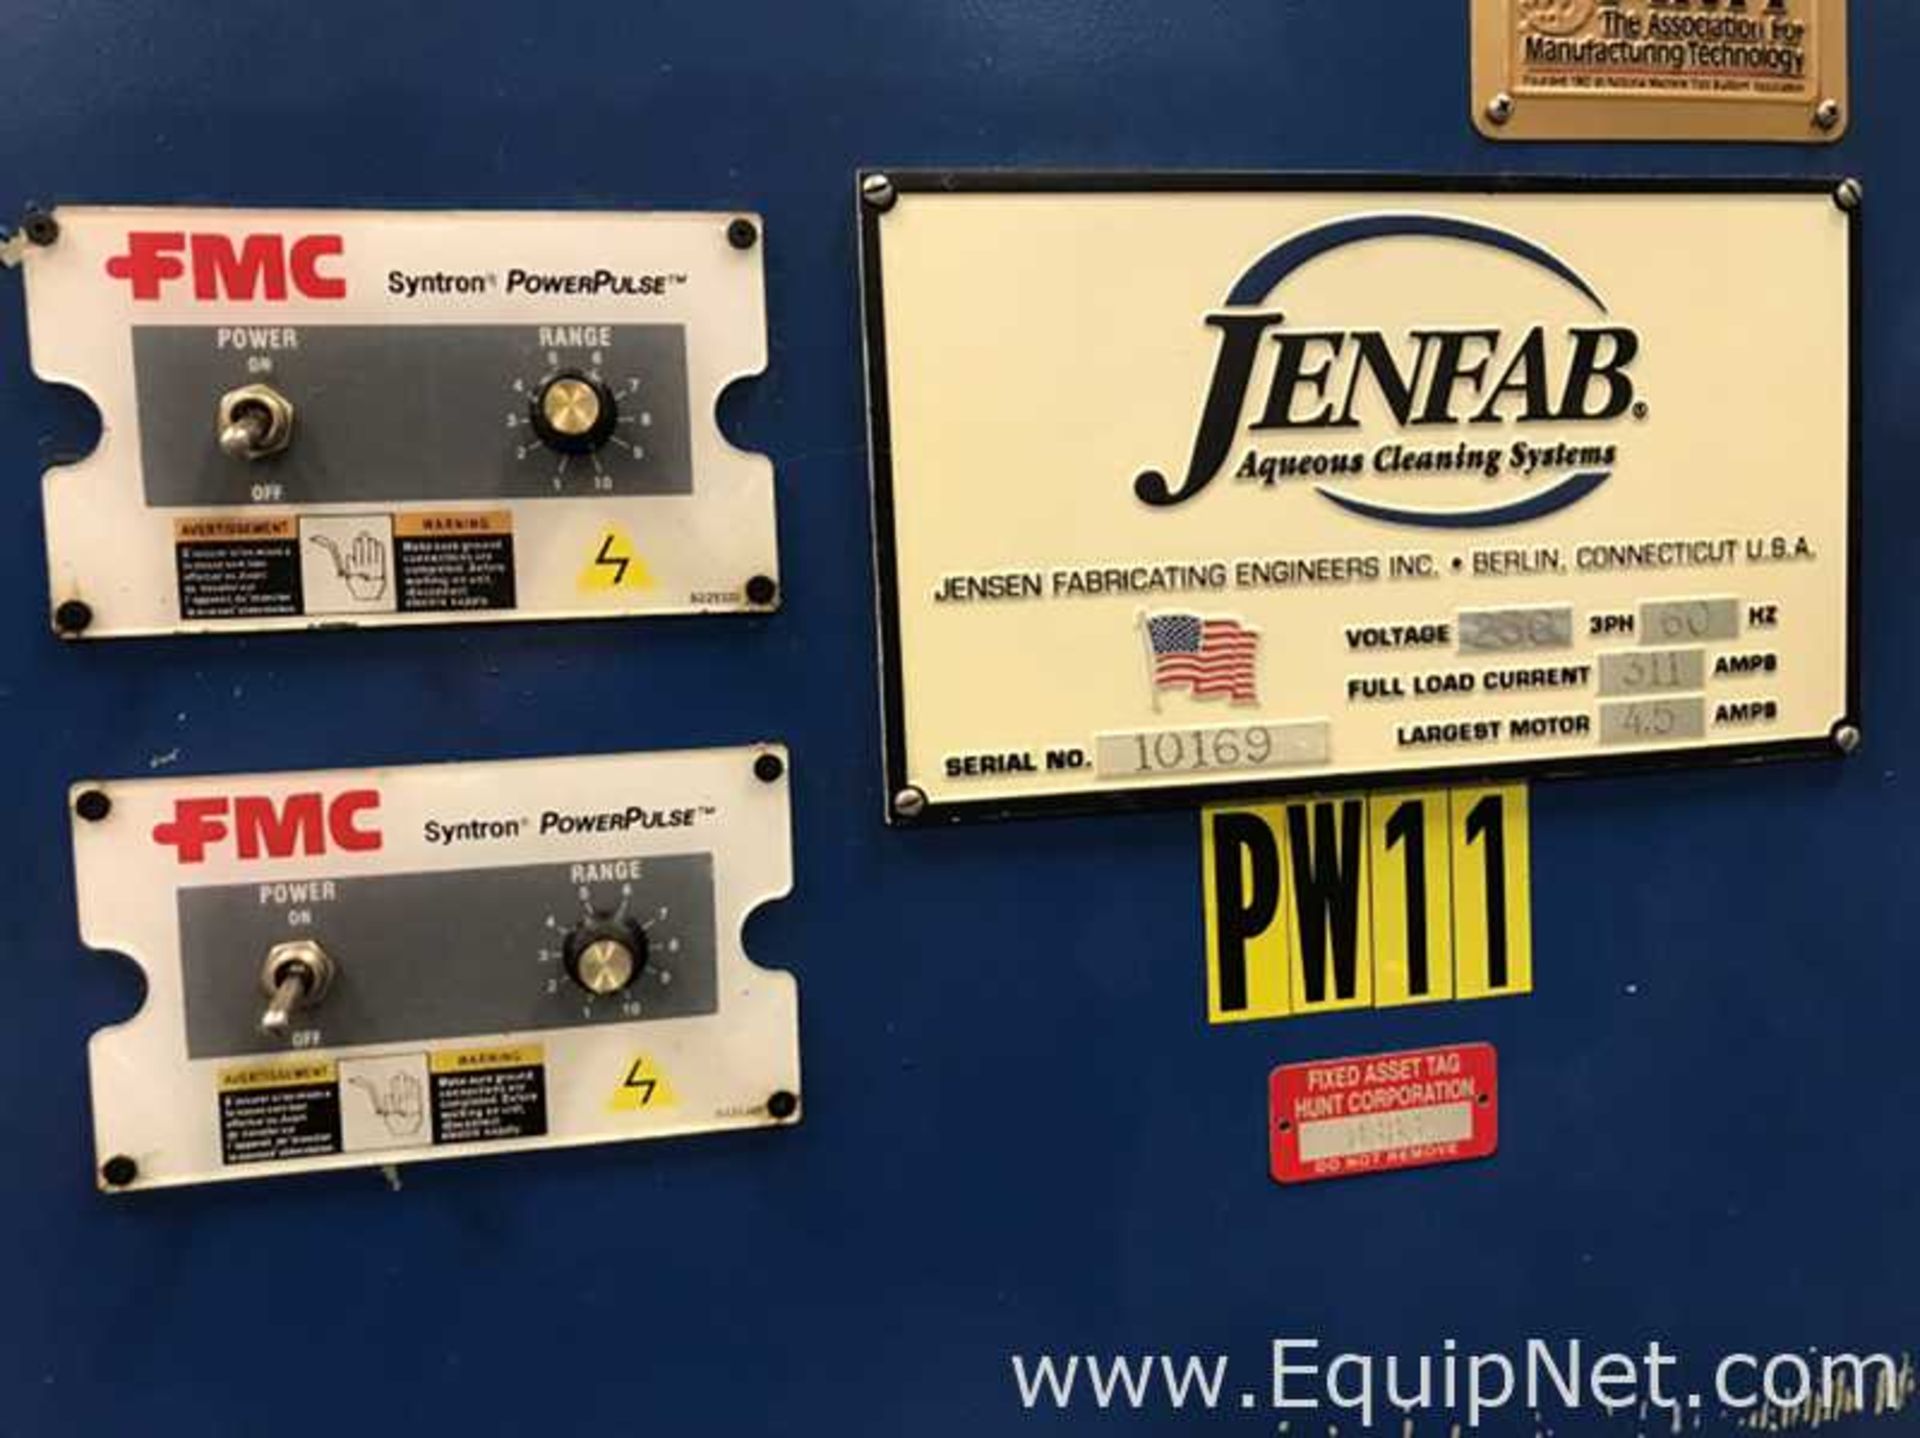 EQUIPNET LISTING #842982; REMOVAL COST: TBD; DESCRIPTION: Jenfab Rotary Three Stage Dual Drum Drum - Image 2 of 6